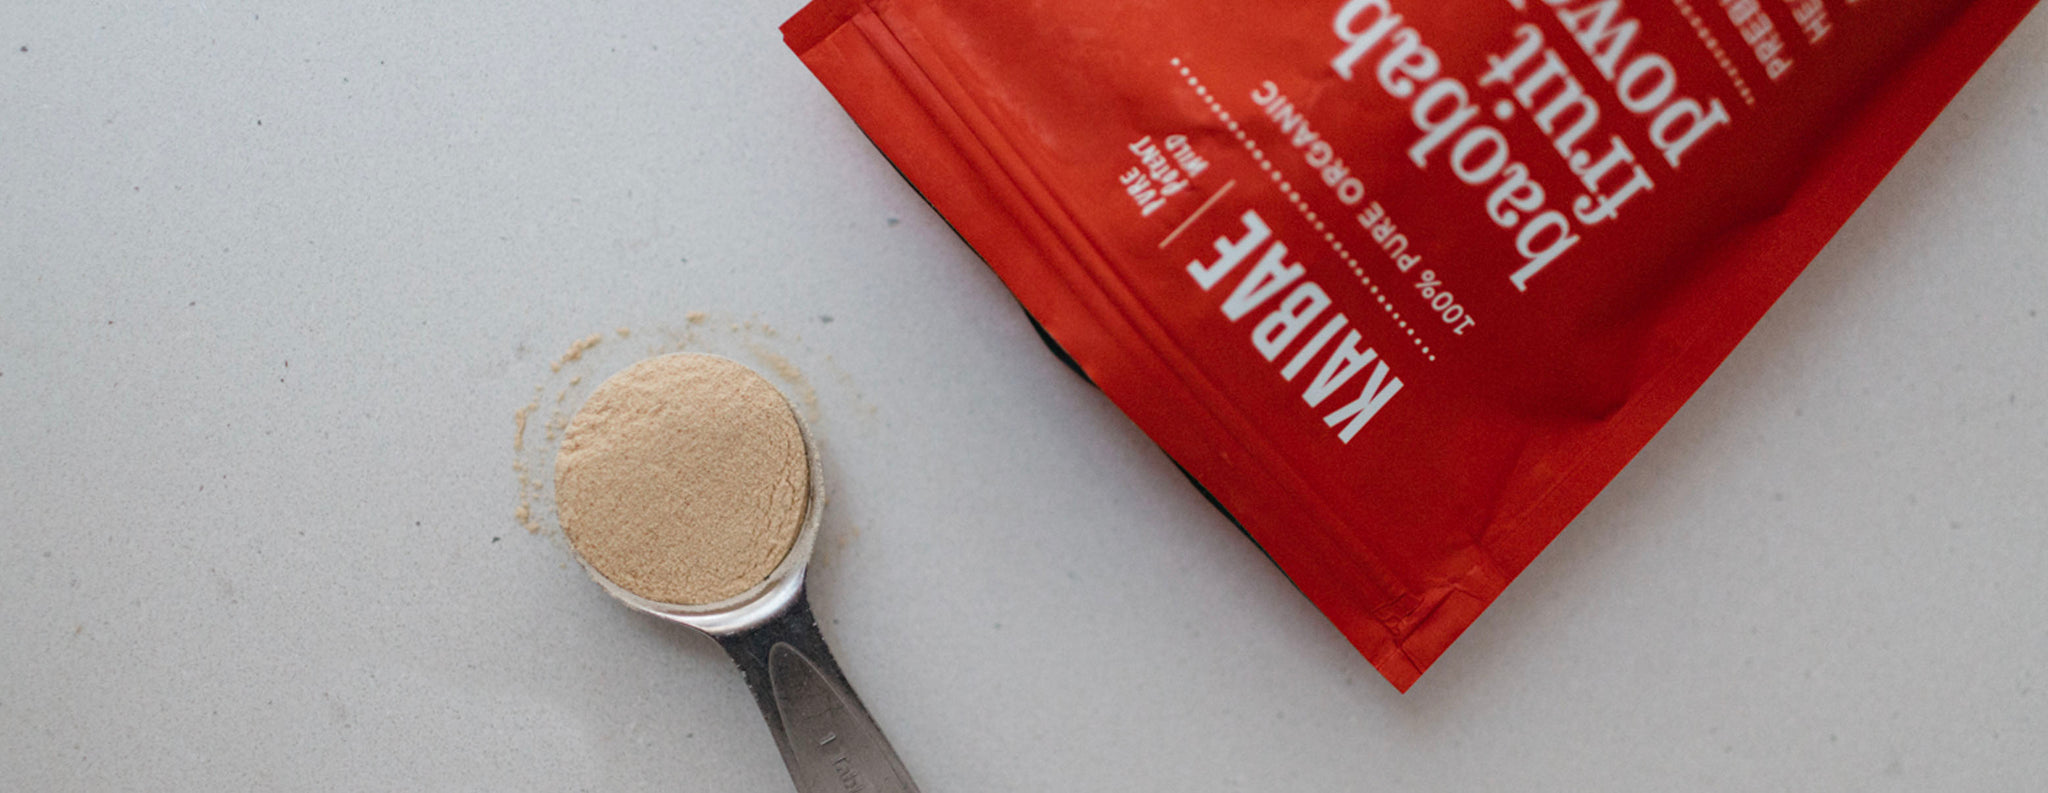 Baobab powder in a bright red pouch on its side with a measuring spoon of Baobab 